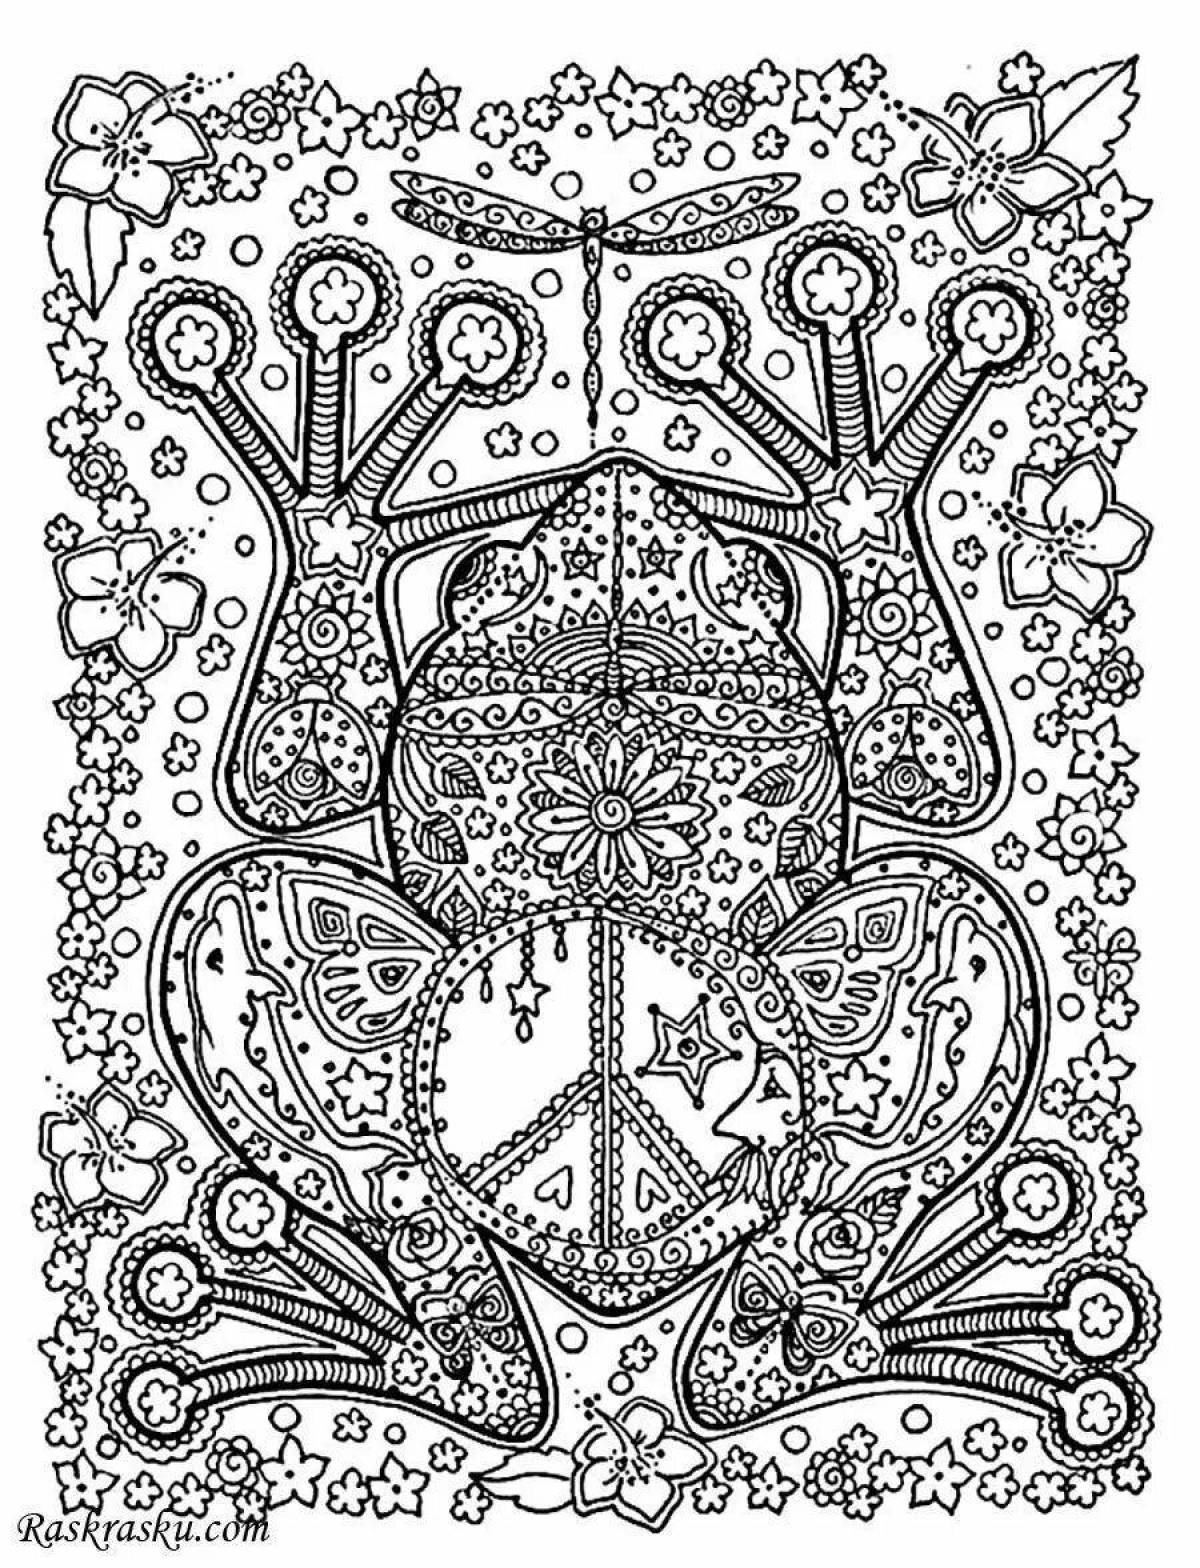 Serene psychological coloring book for adults